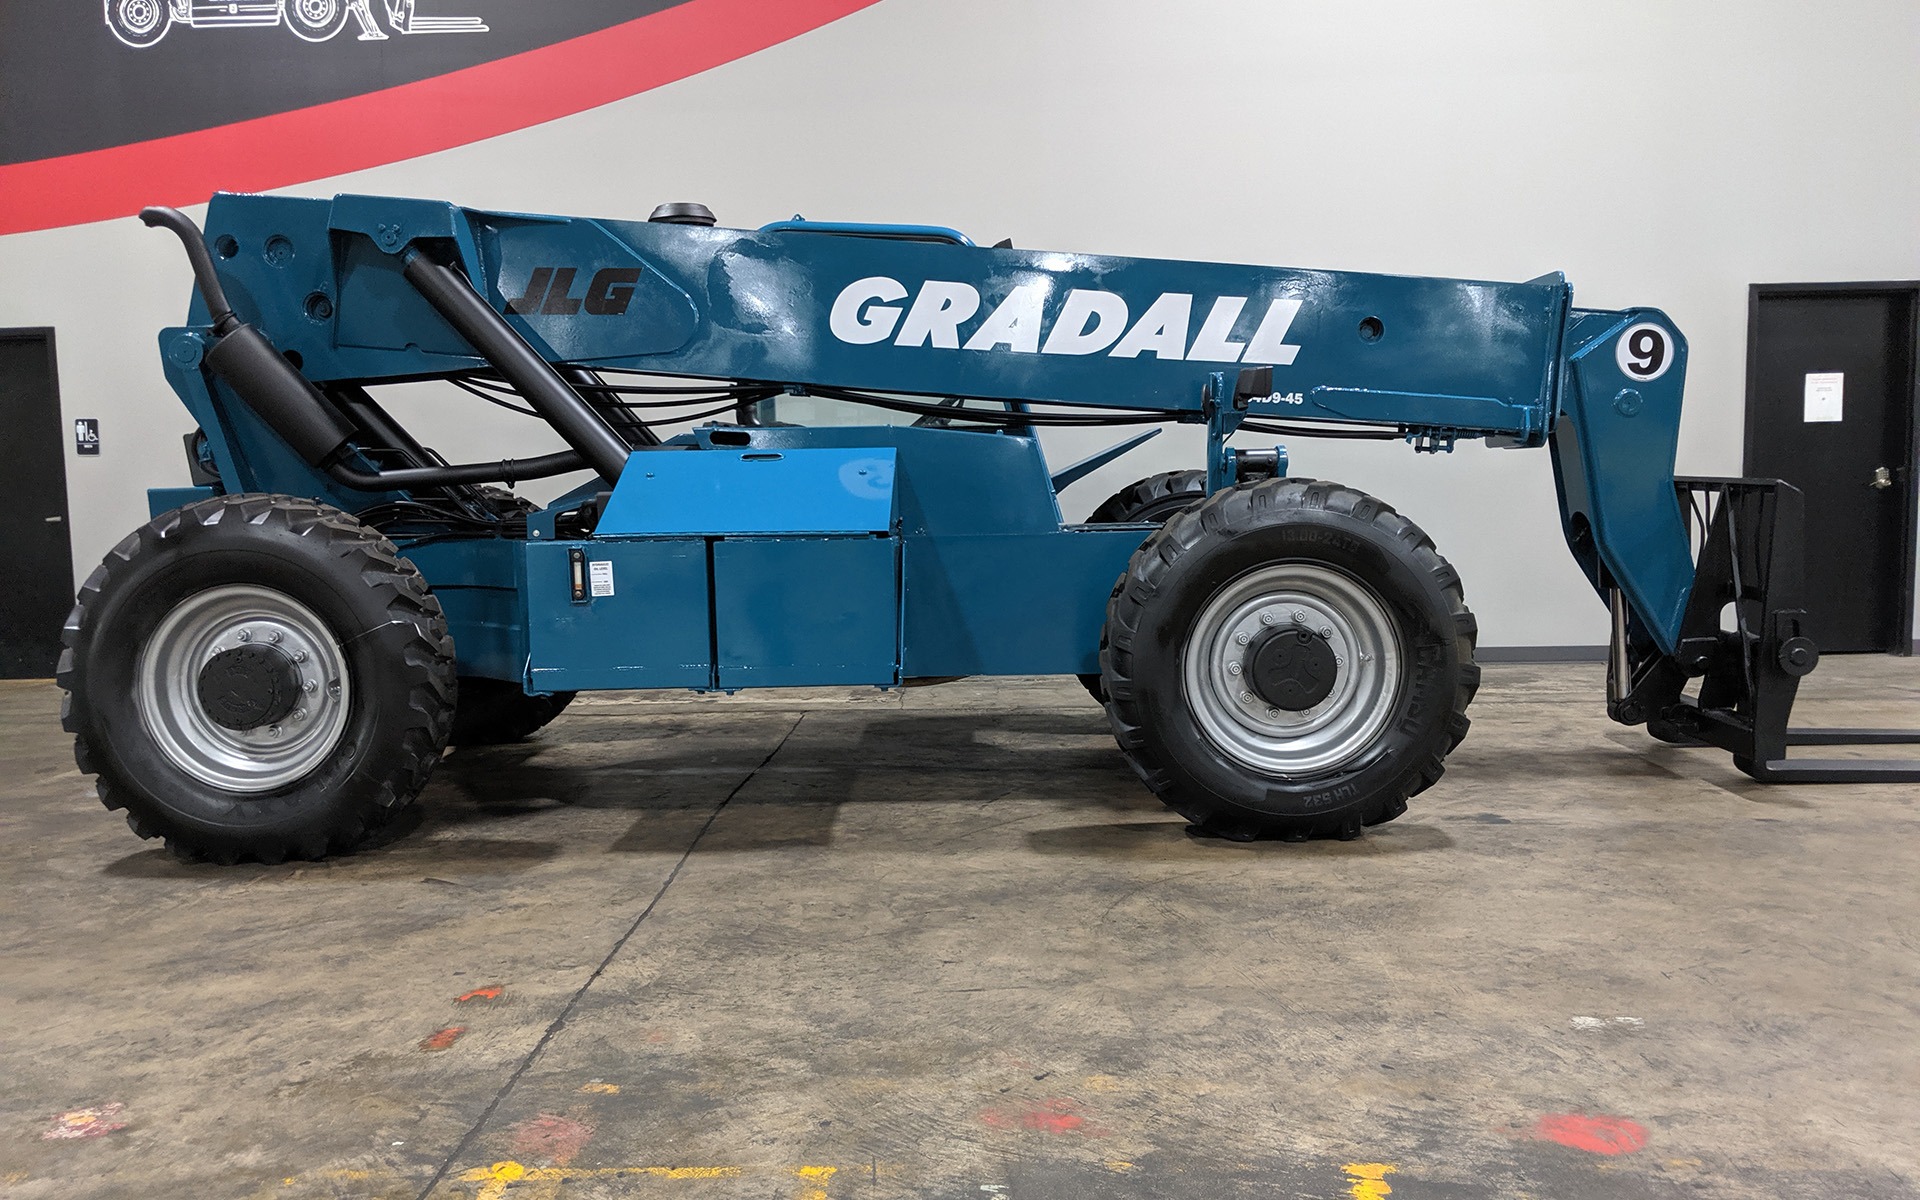 Used 2007 GRADALL 534D-9  | Cary, IL